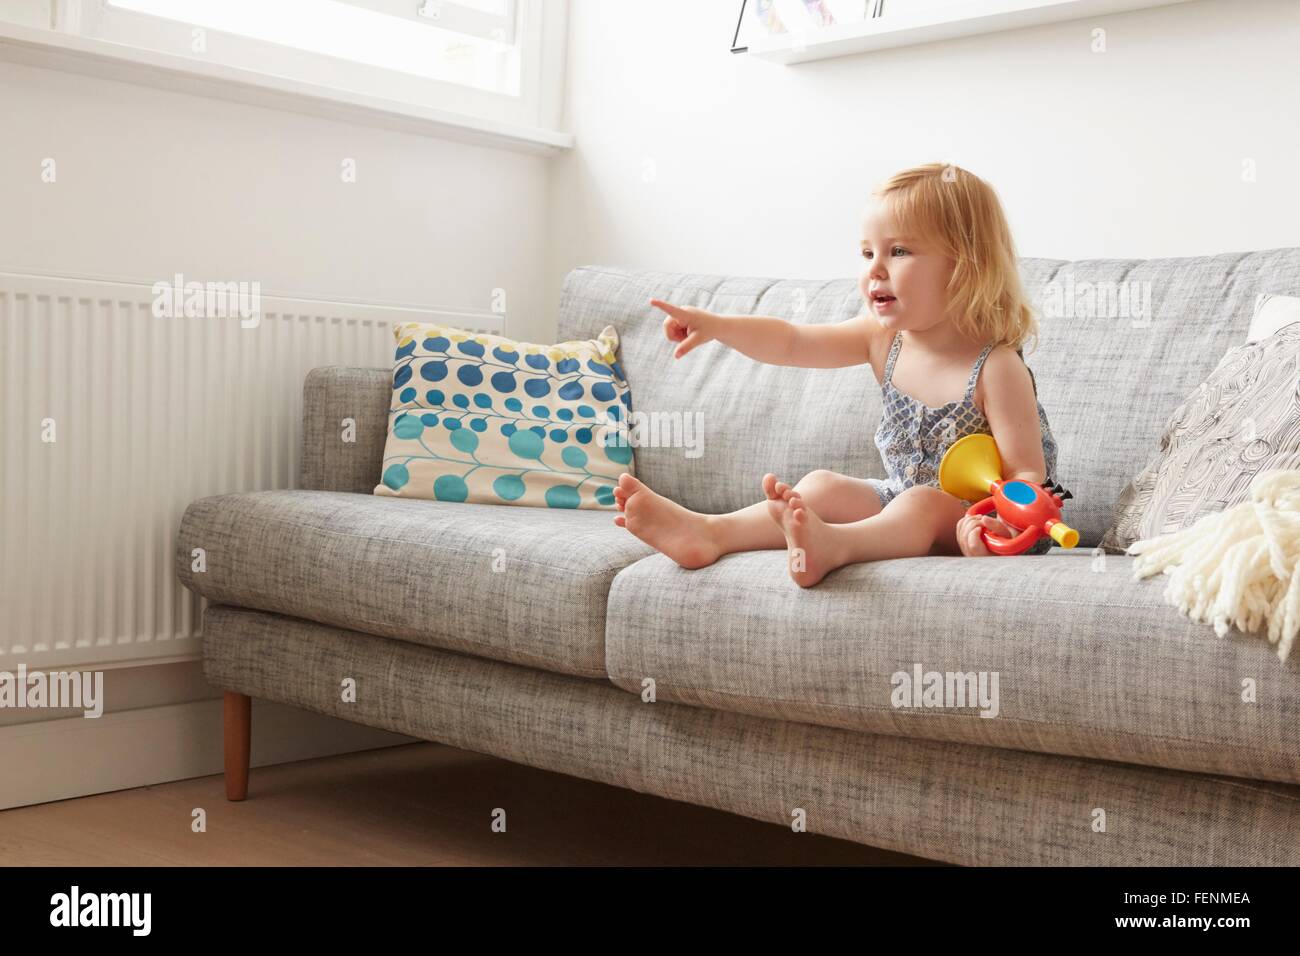 Female toddler playing with toy trumpet on sofa Stock Photo